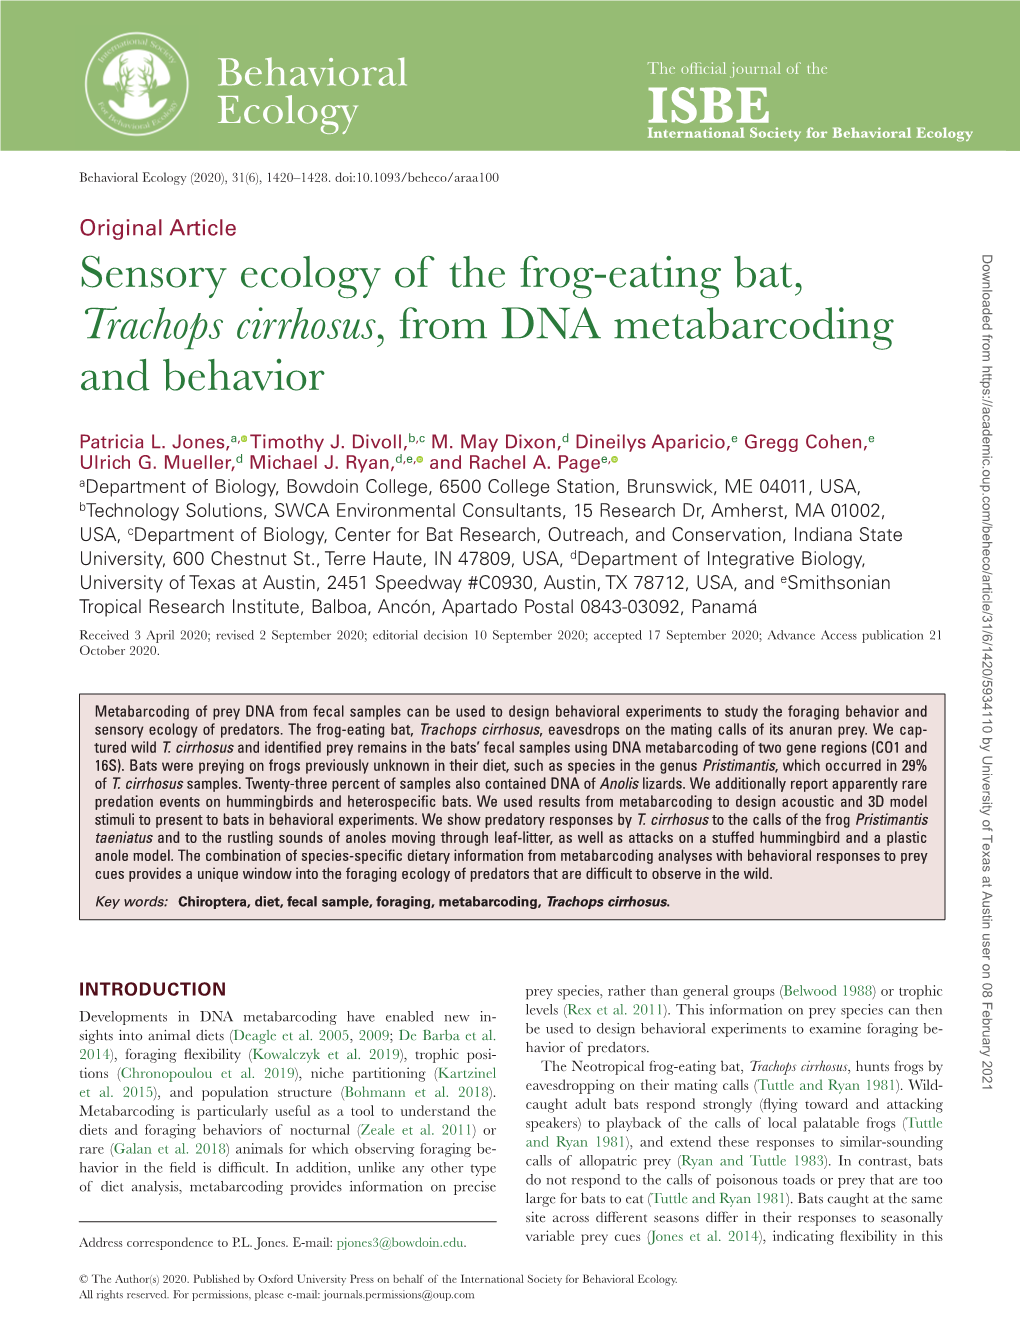 Sensory Ecology of the Frog-Eating Bat, Trachops Cirrhosus, from DNA